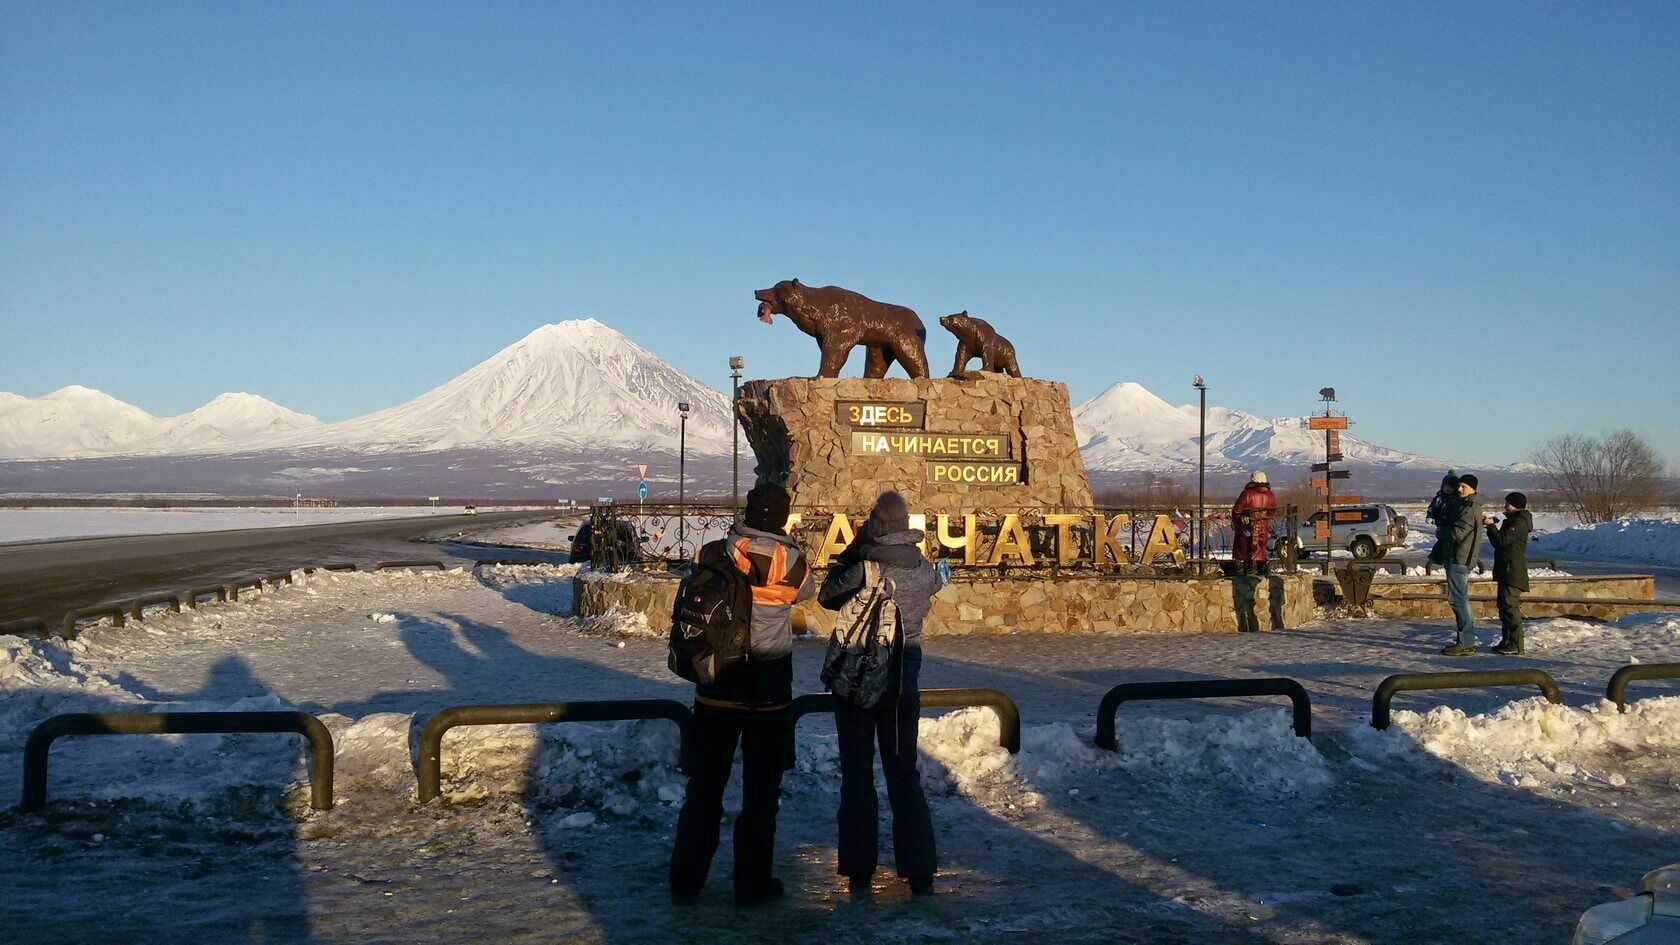 "There is no place for poor locust in Kamchatka!" A tourism scandal erupted on the peninsula